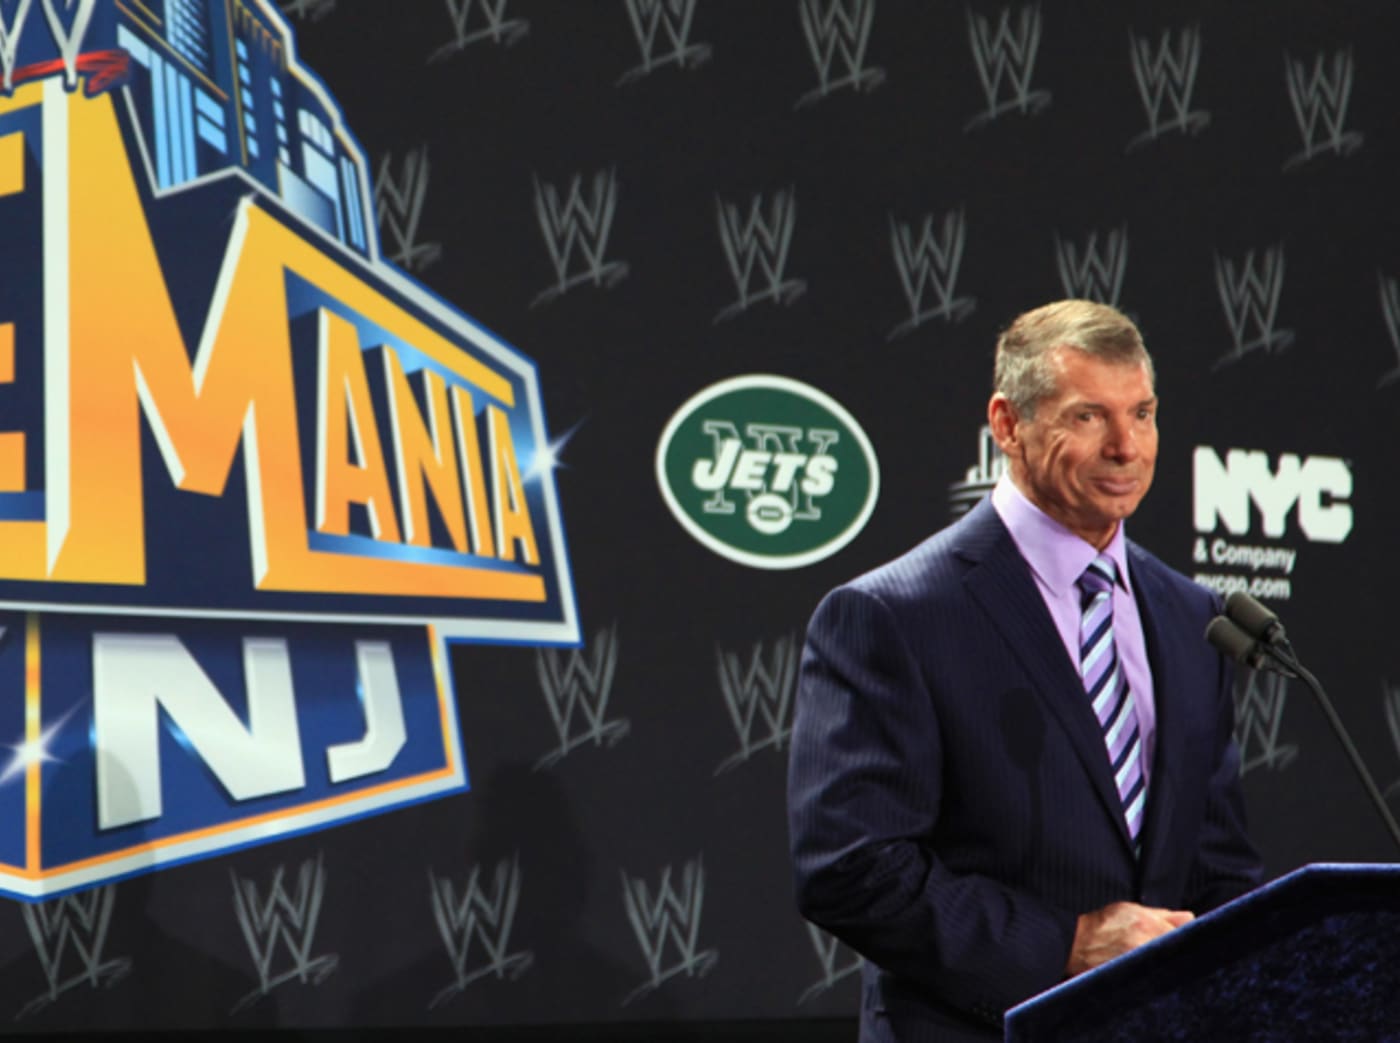 WWE Chairman and CEO Vince McMahon at Wrestlemania XXIX press conference